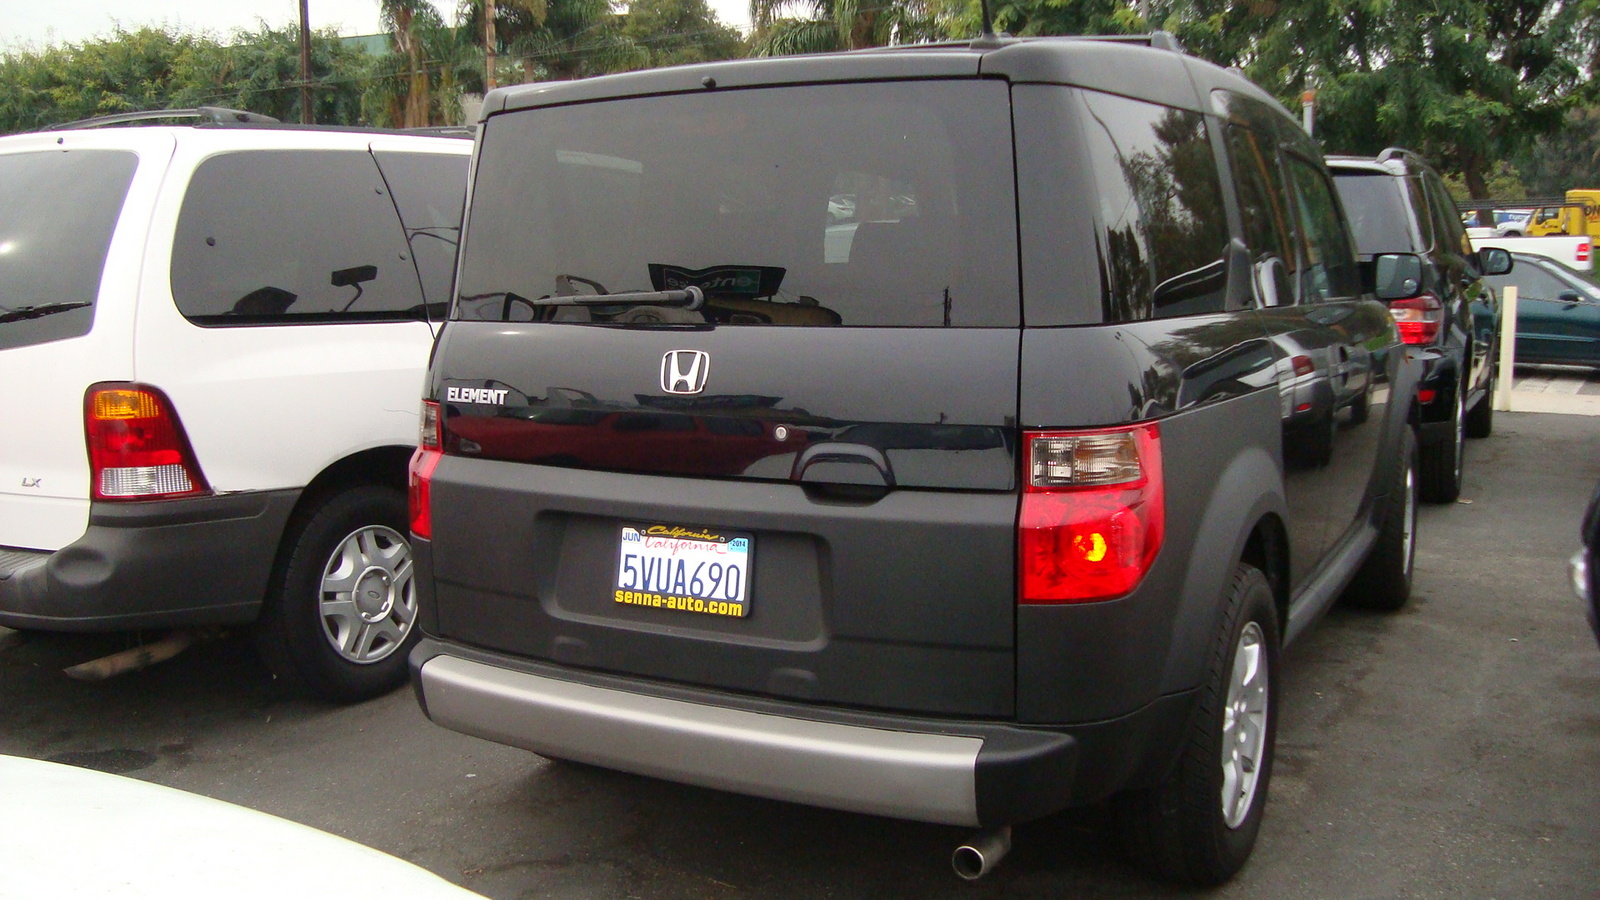 2005 Honda element review opinion #2